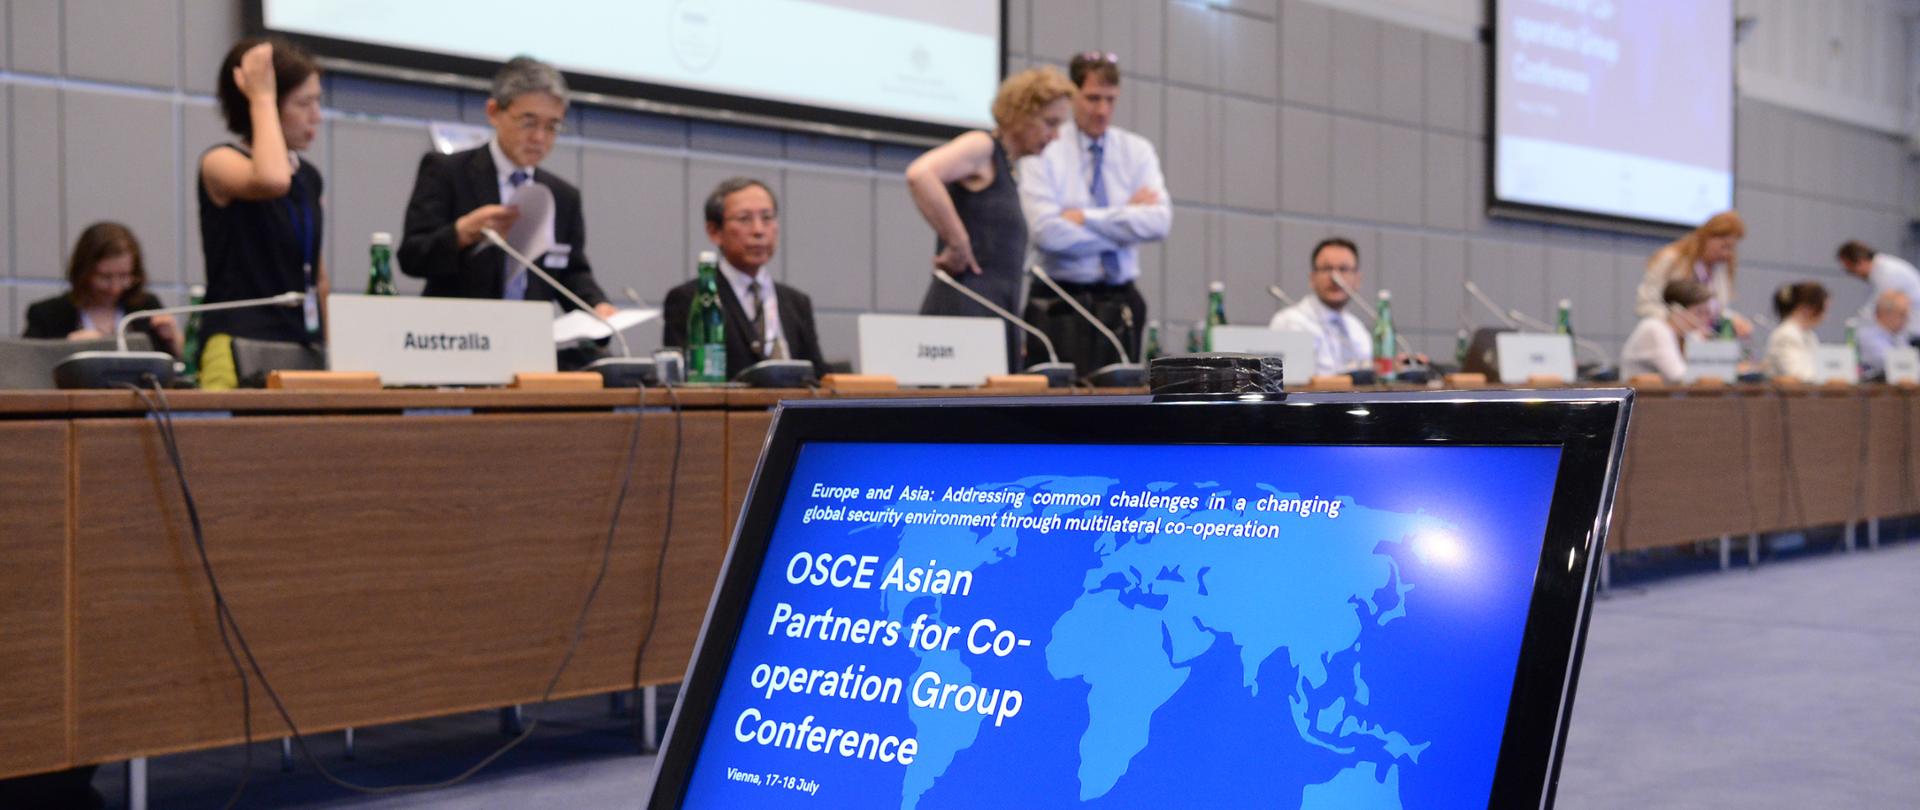 OSCE Asian Partners for Co-operation Group Conference